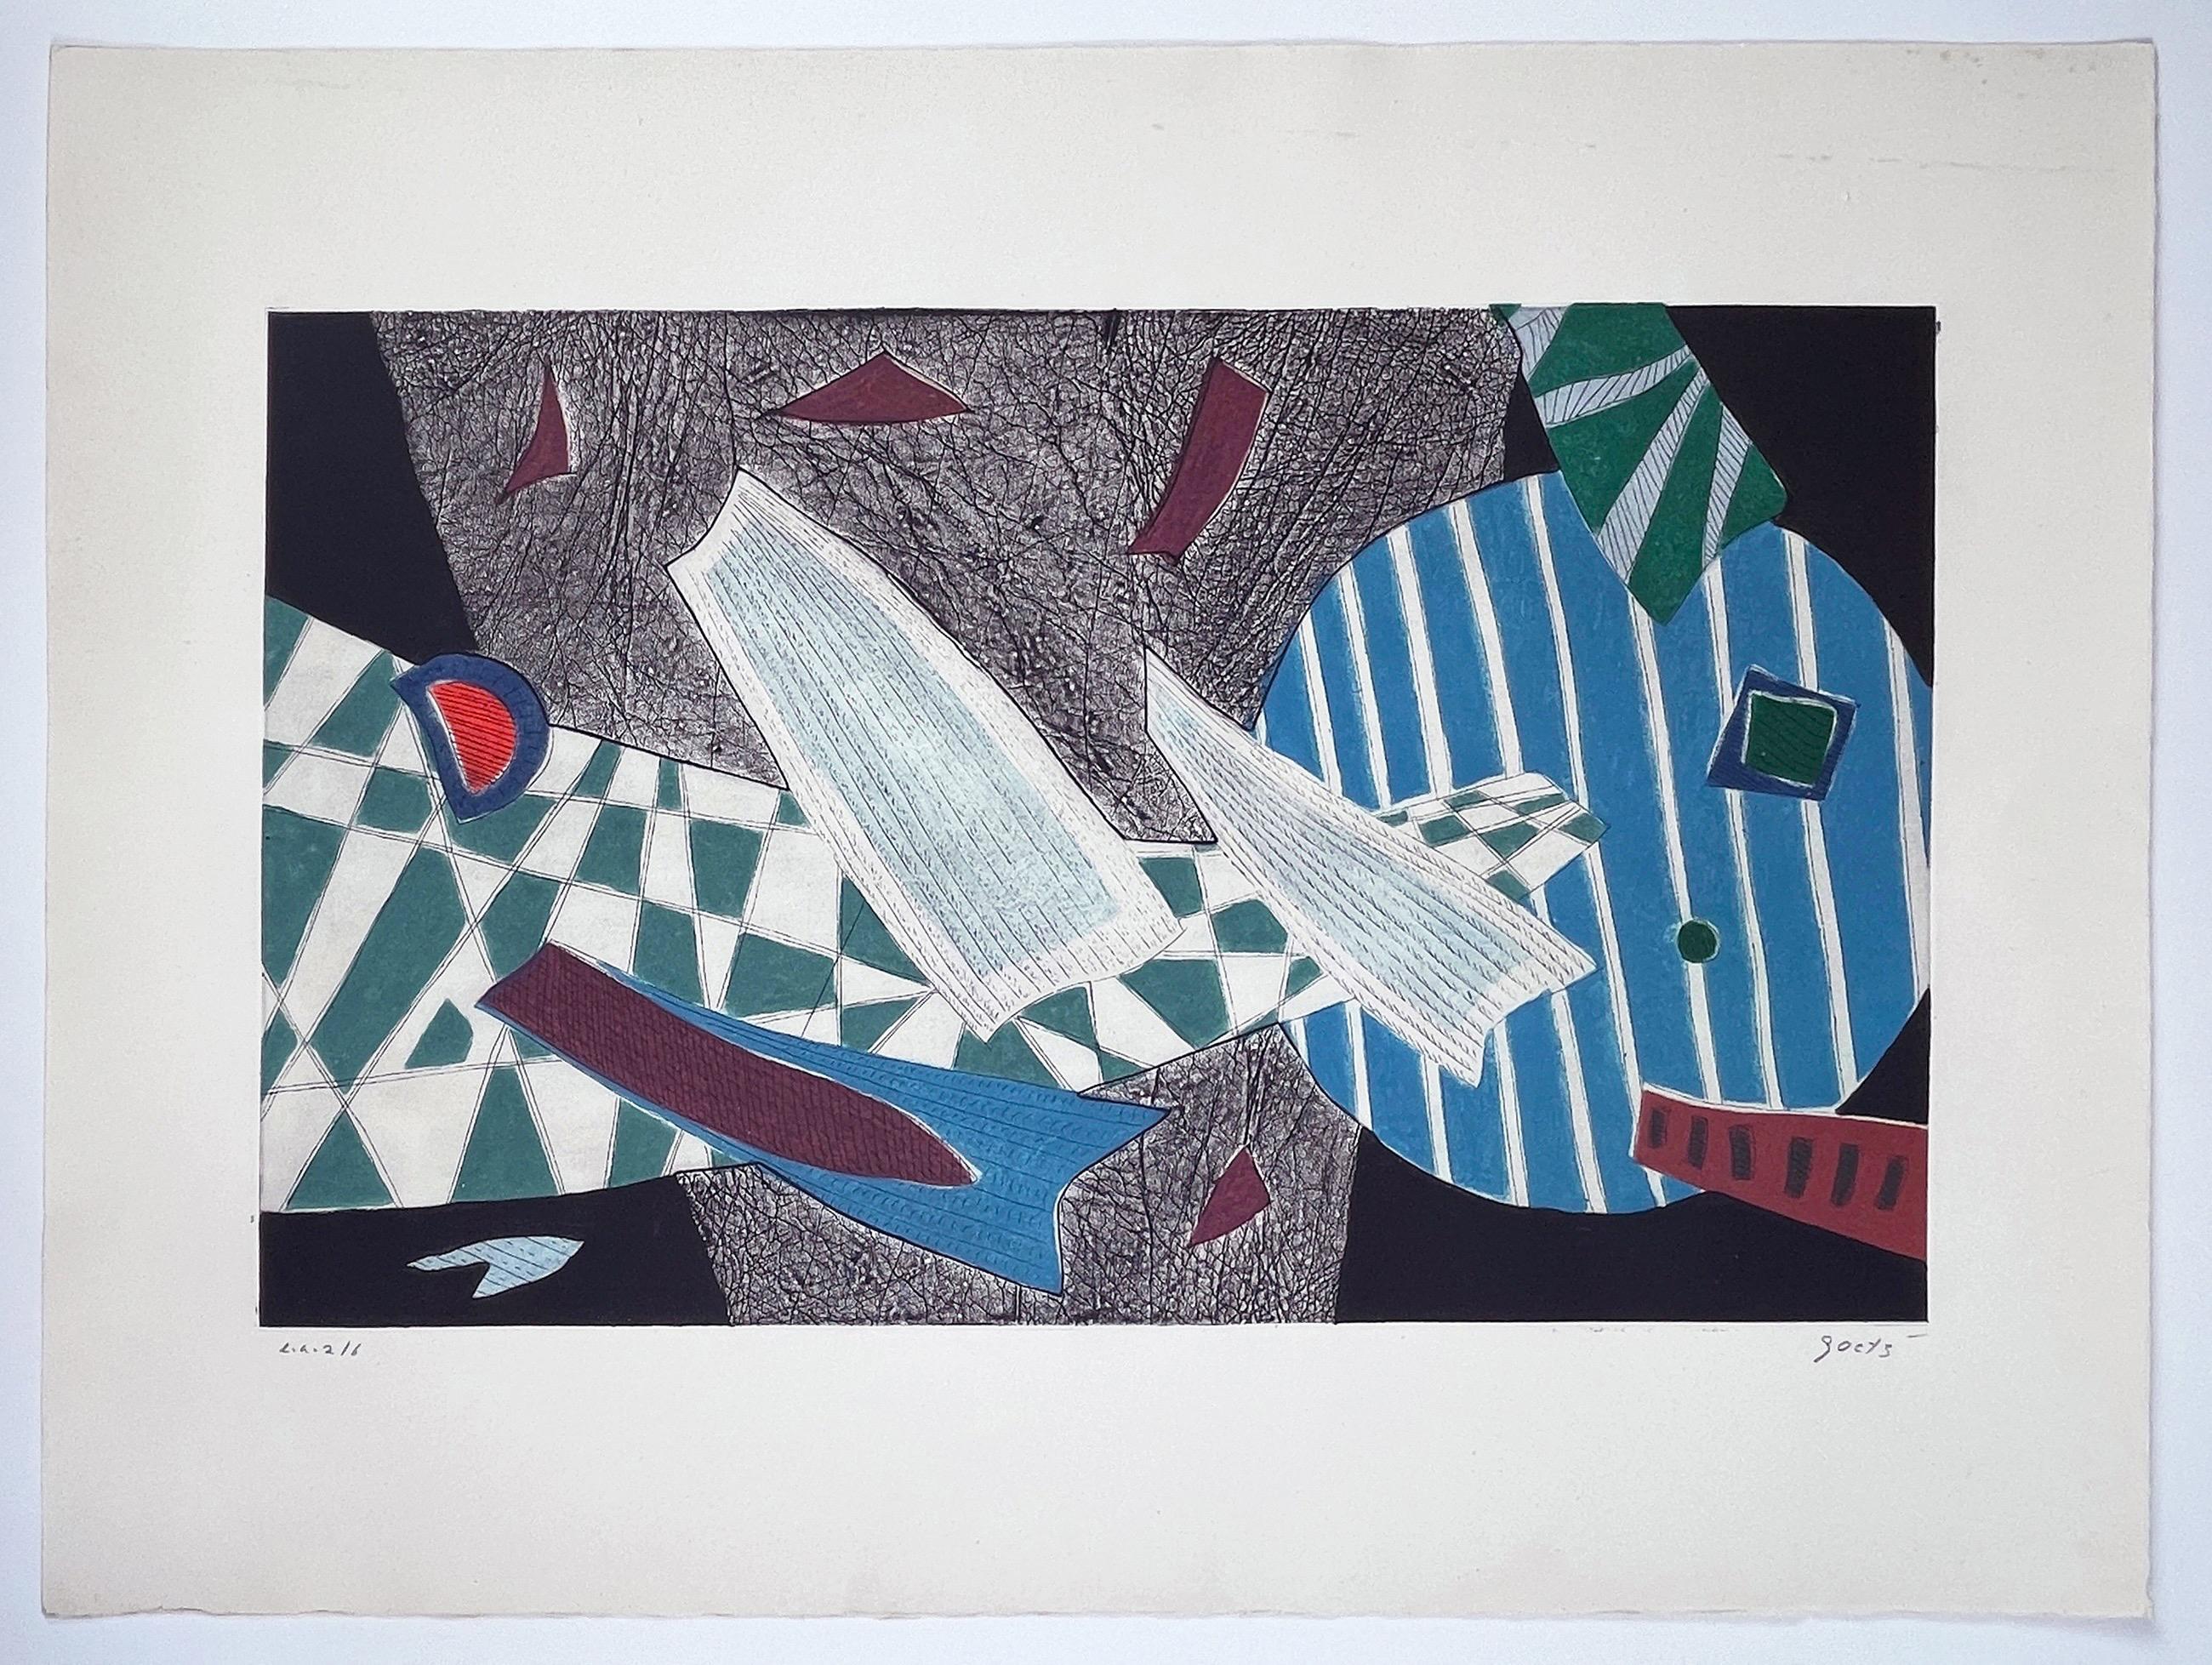 Set of four abstract, surrealist compositions in rich blue, green, purple, turquoise, grey, navy and black. 

Henri Goetz
Suite of four etchings with carborundum on Arches wove paper, ca. 1975-1978
Various dimensions: one at 20 x 25.5 in. / one at